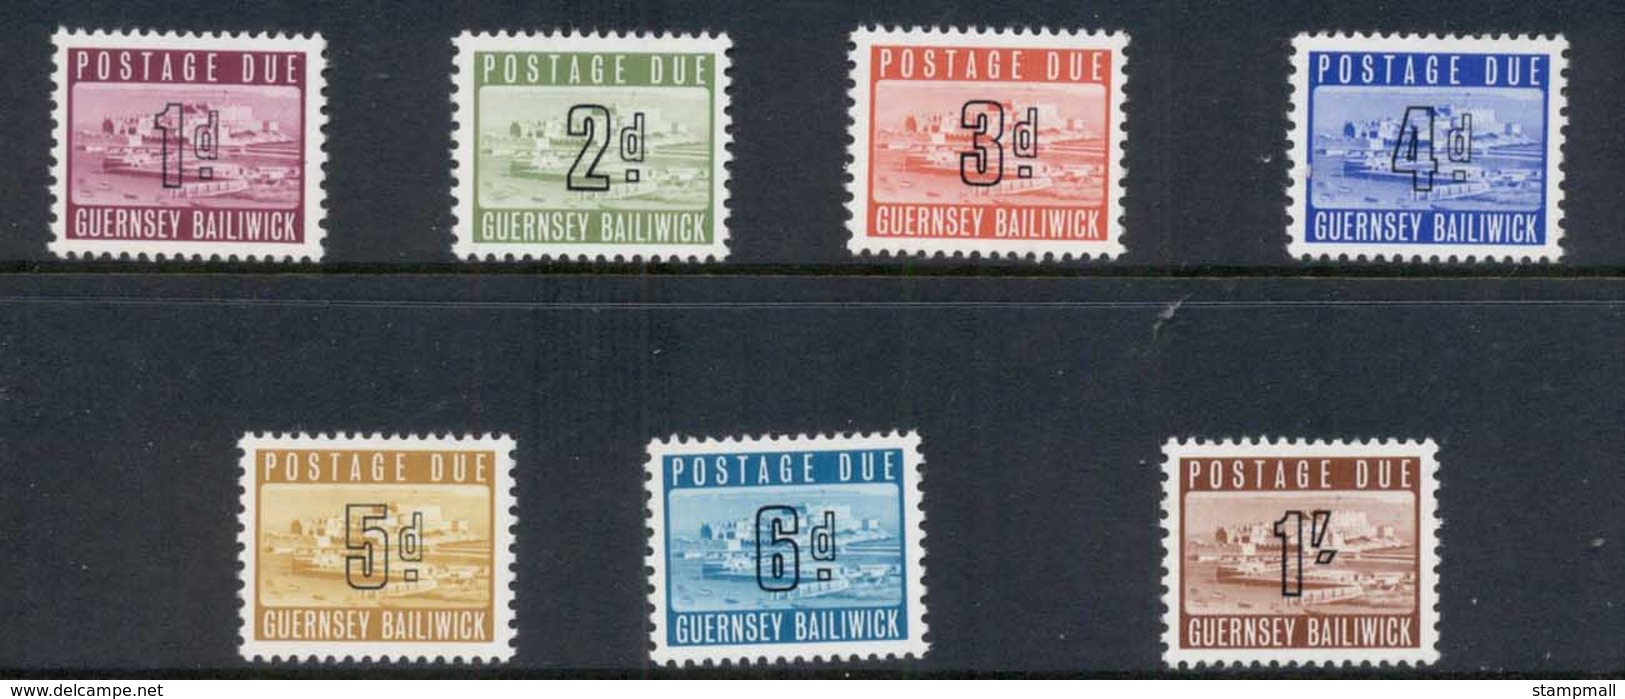 Guernsey 1969 Postage Dues MUH - Guernesey